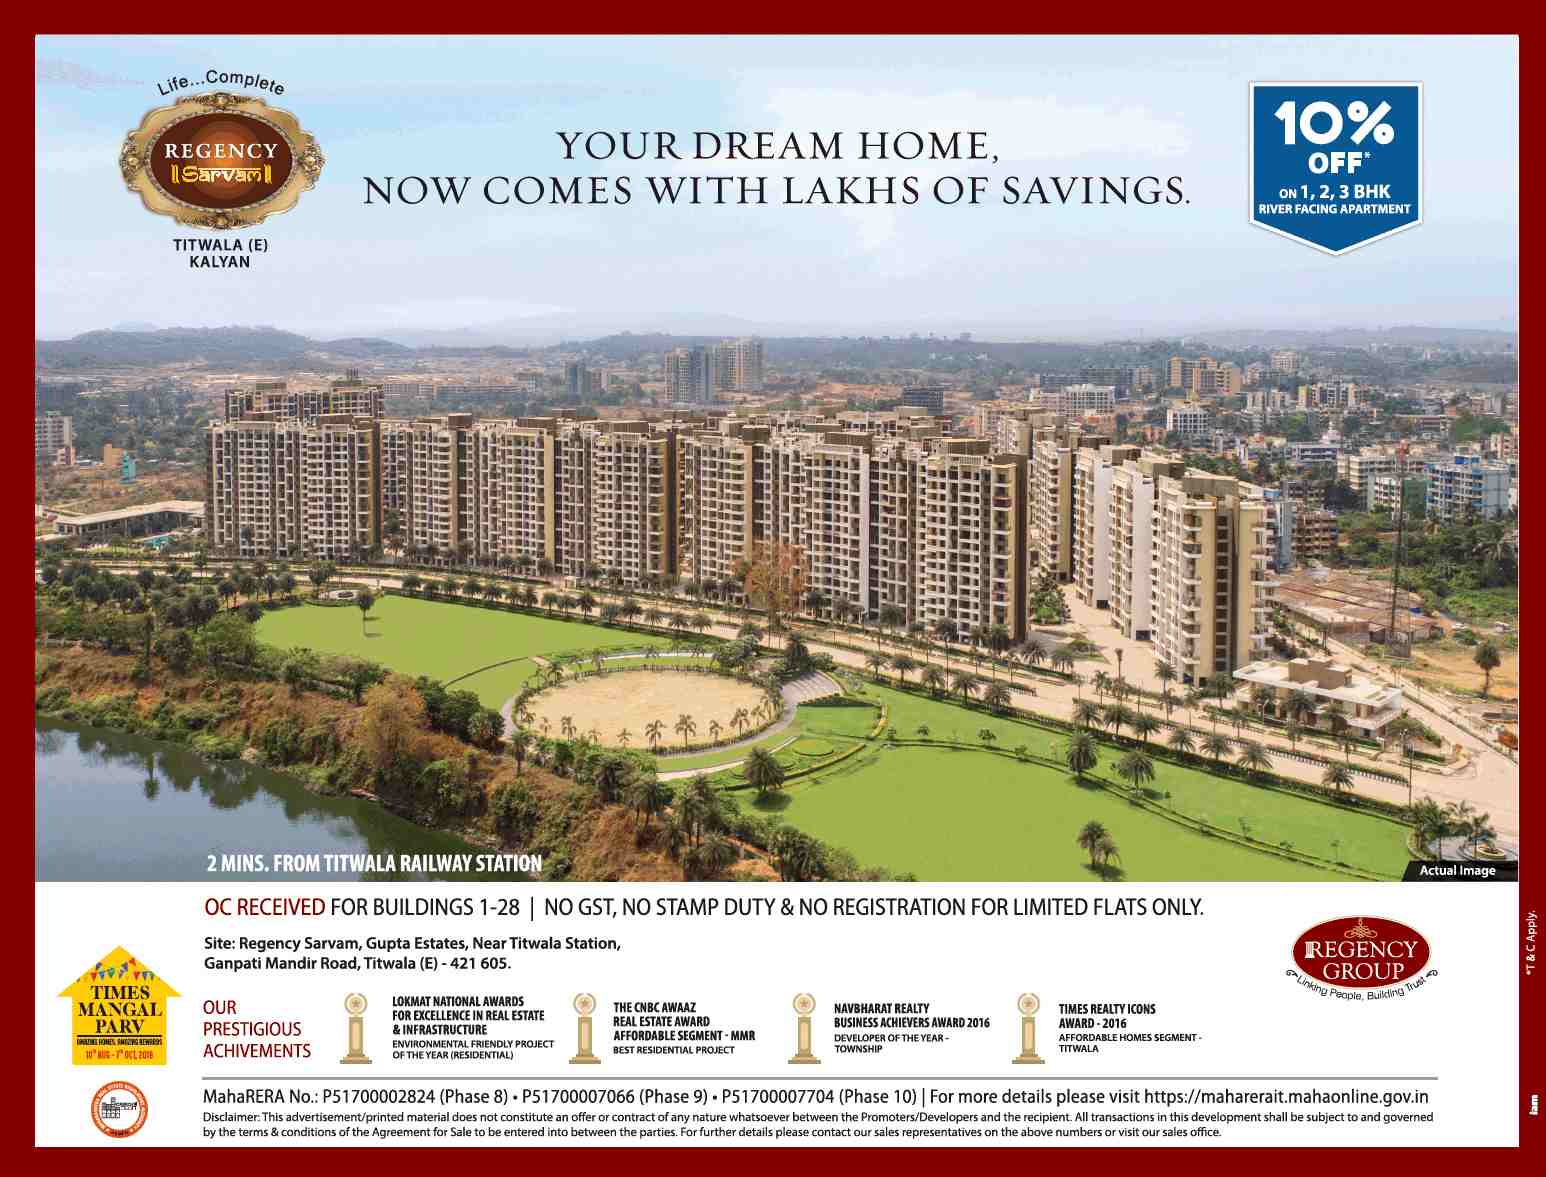 Get 10% off on 1, 2 and 3 BHK river facing apartments at Regency Sarvam in Mumbai Update